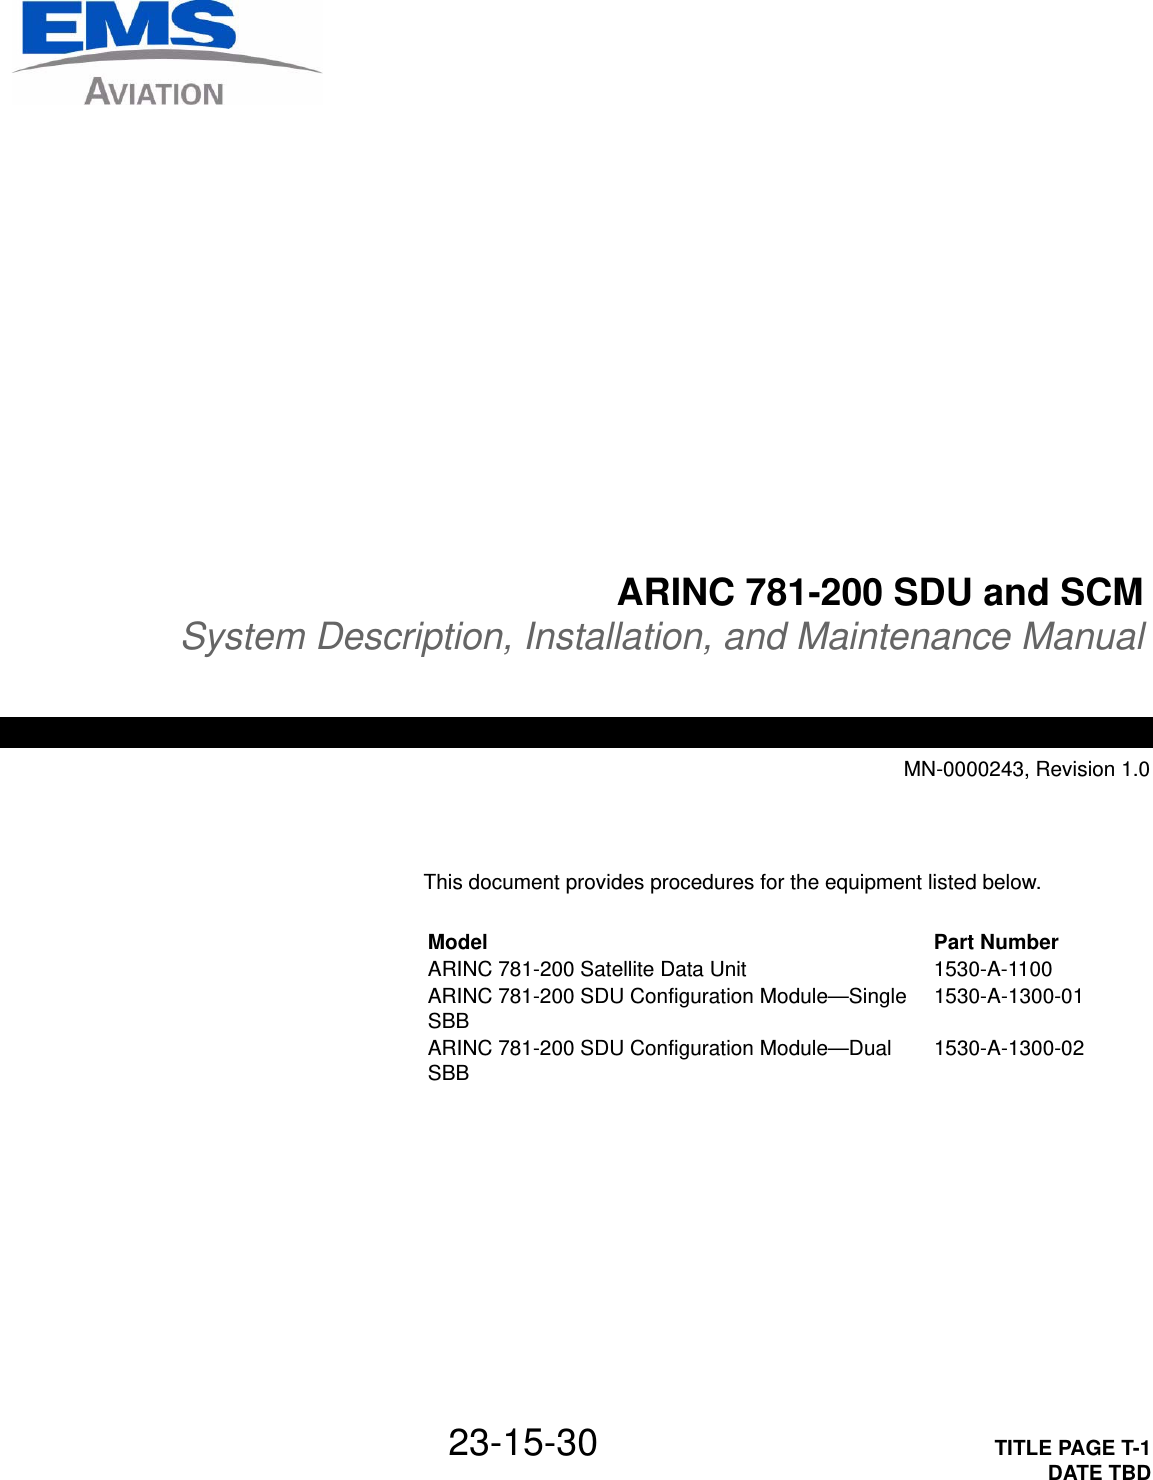 23-15-30 TITLE PAGE T-1DATE TBDARINC 781-200 SDU and SCMSystem Description, Installation, and Maintenance ManualMN-0000243, Revision 1.0This document provides procedures for the equipment listed below.Model Part NumberARINC 781-200 Satellite Data Unit 1530-A-1100ARINC 781-200 SDU Configuration Module—Single SBB 1530-A-1300-01ARINC 781-200 SDU Configuration Module—Dual SBB 1530-A-1300-02